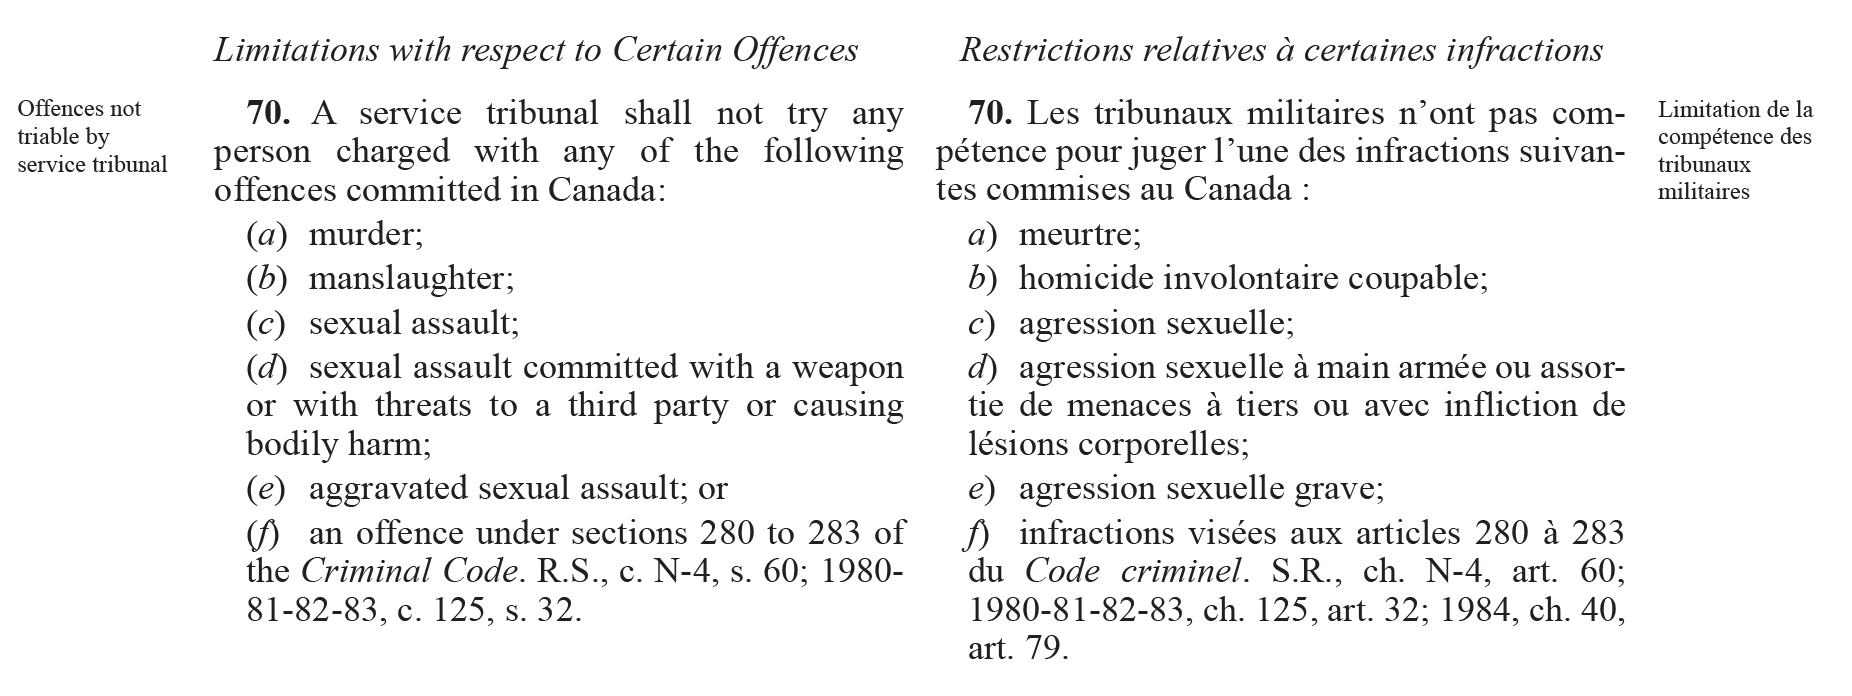 Paragraph 70 of the National Defence Act